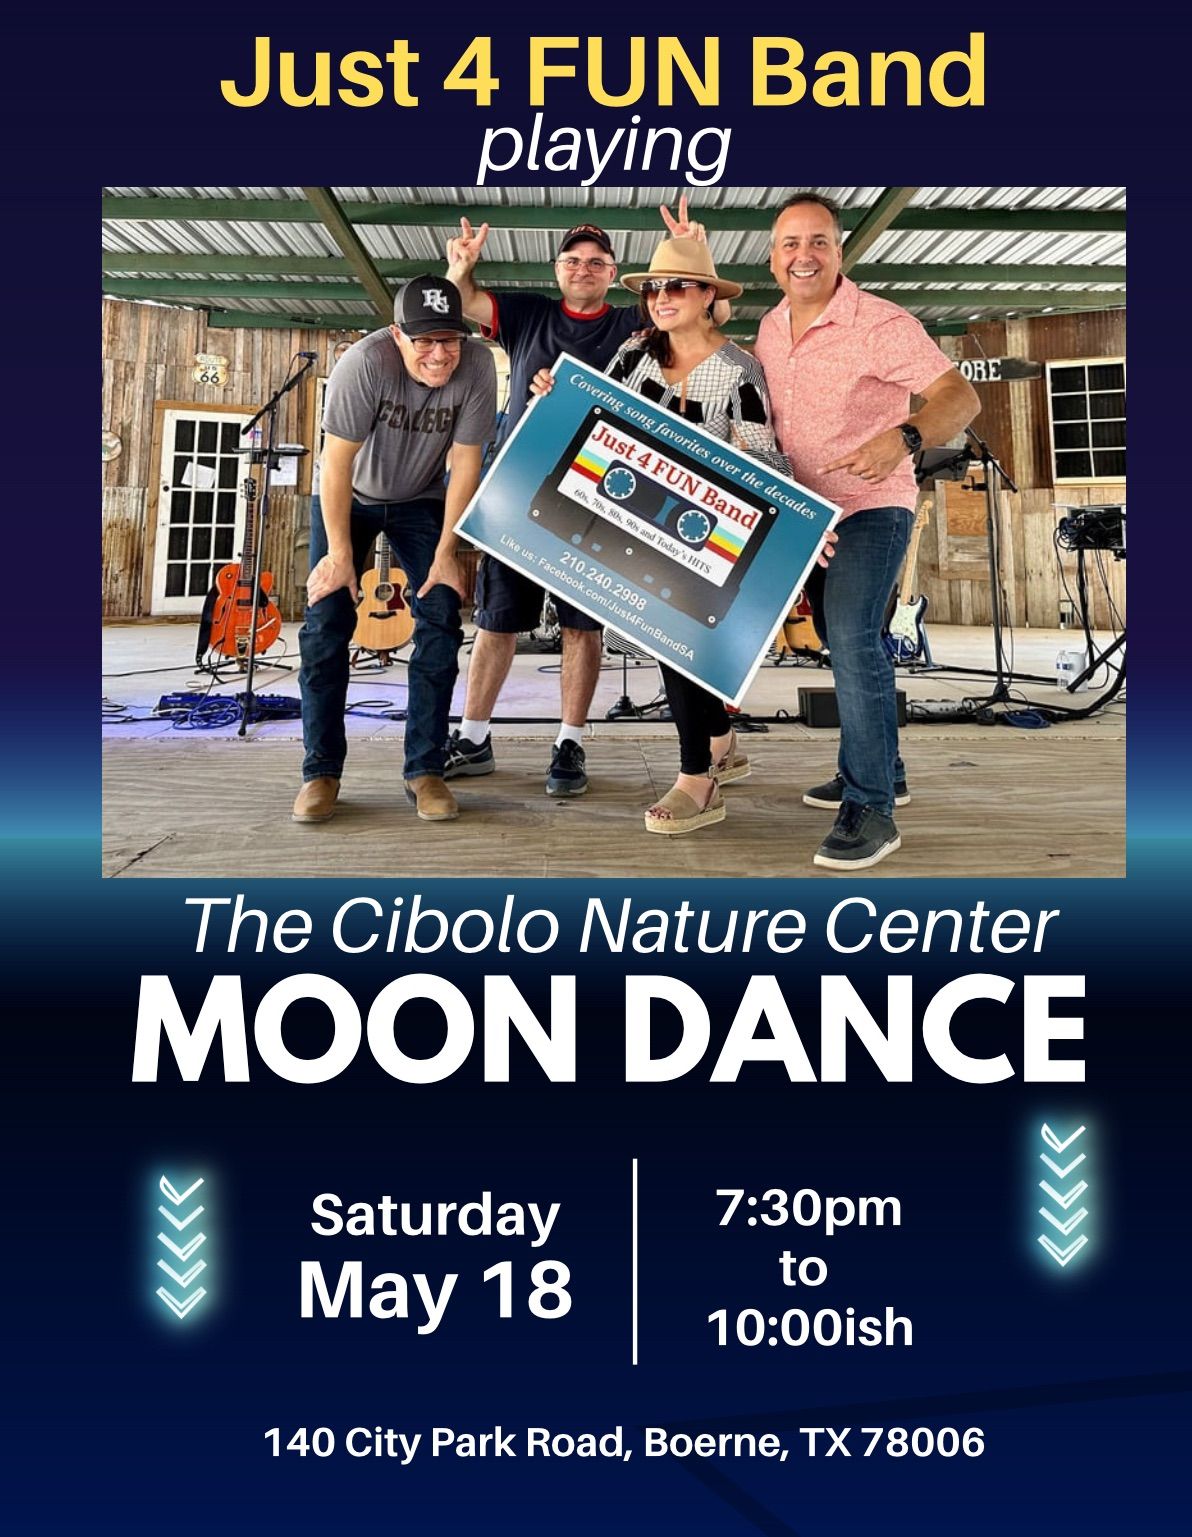 Just 4 FUN Band playing the MOONDANCE @ Cibolo Nature Center